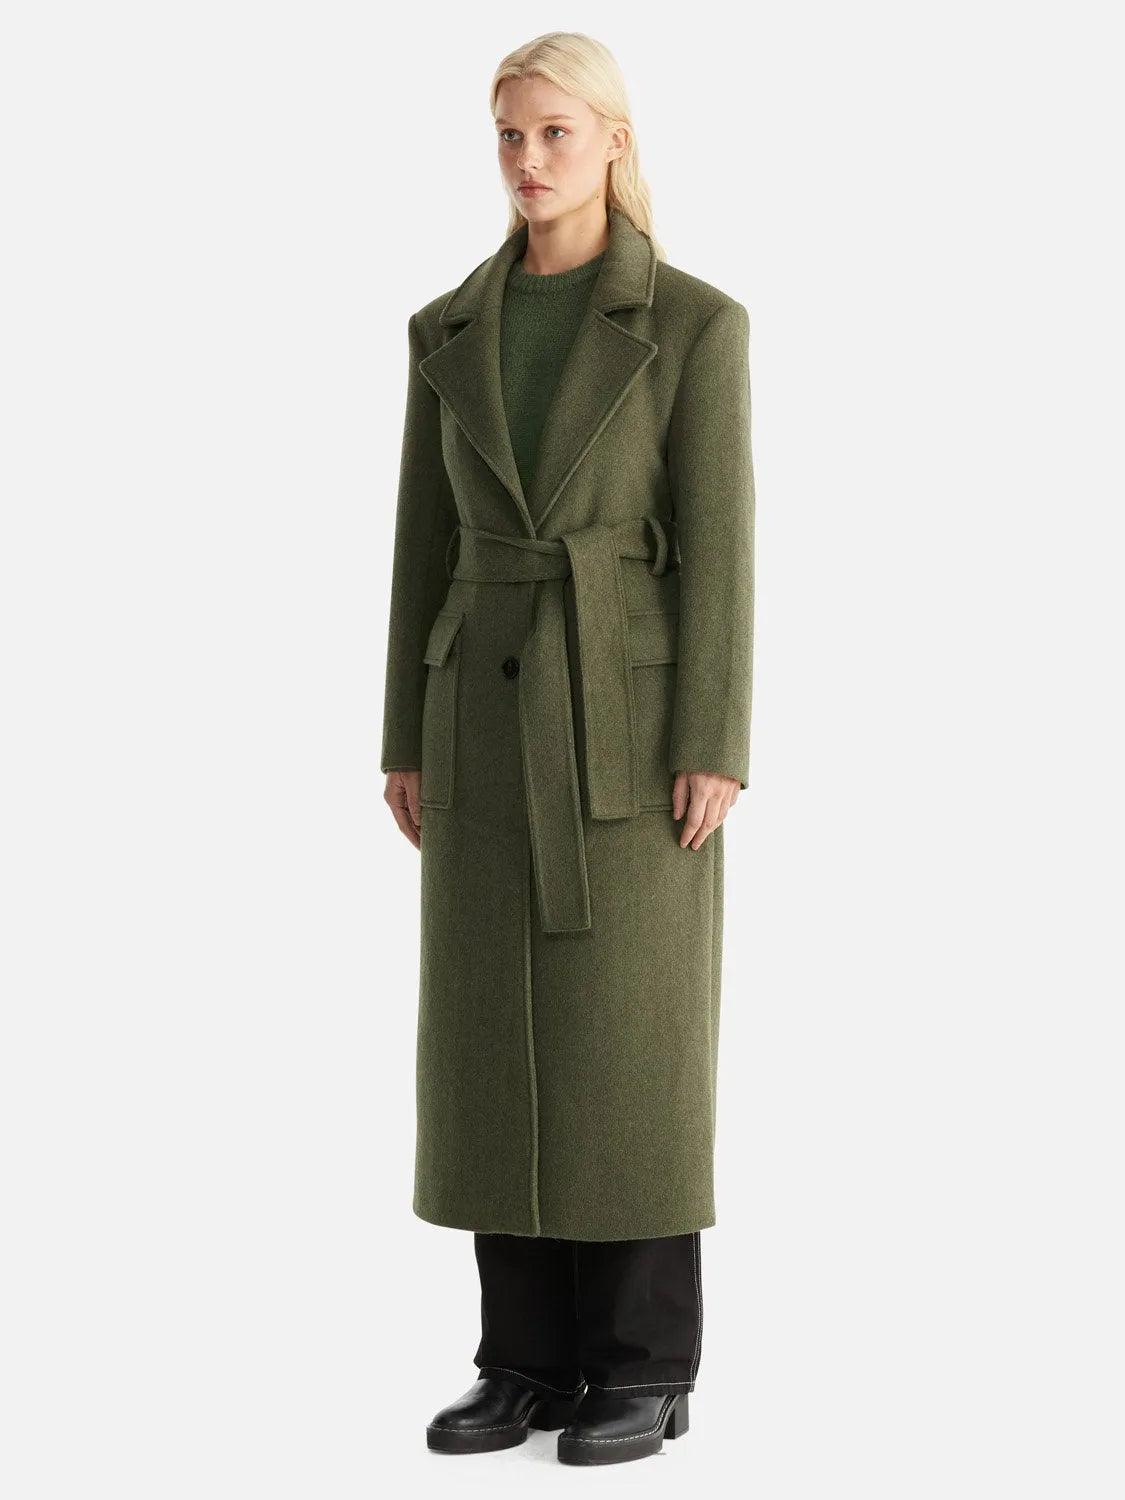 Ena Pelly | Madison Wool Coat - Forest